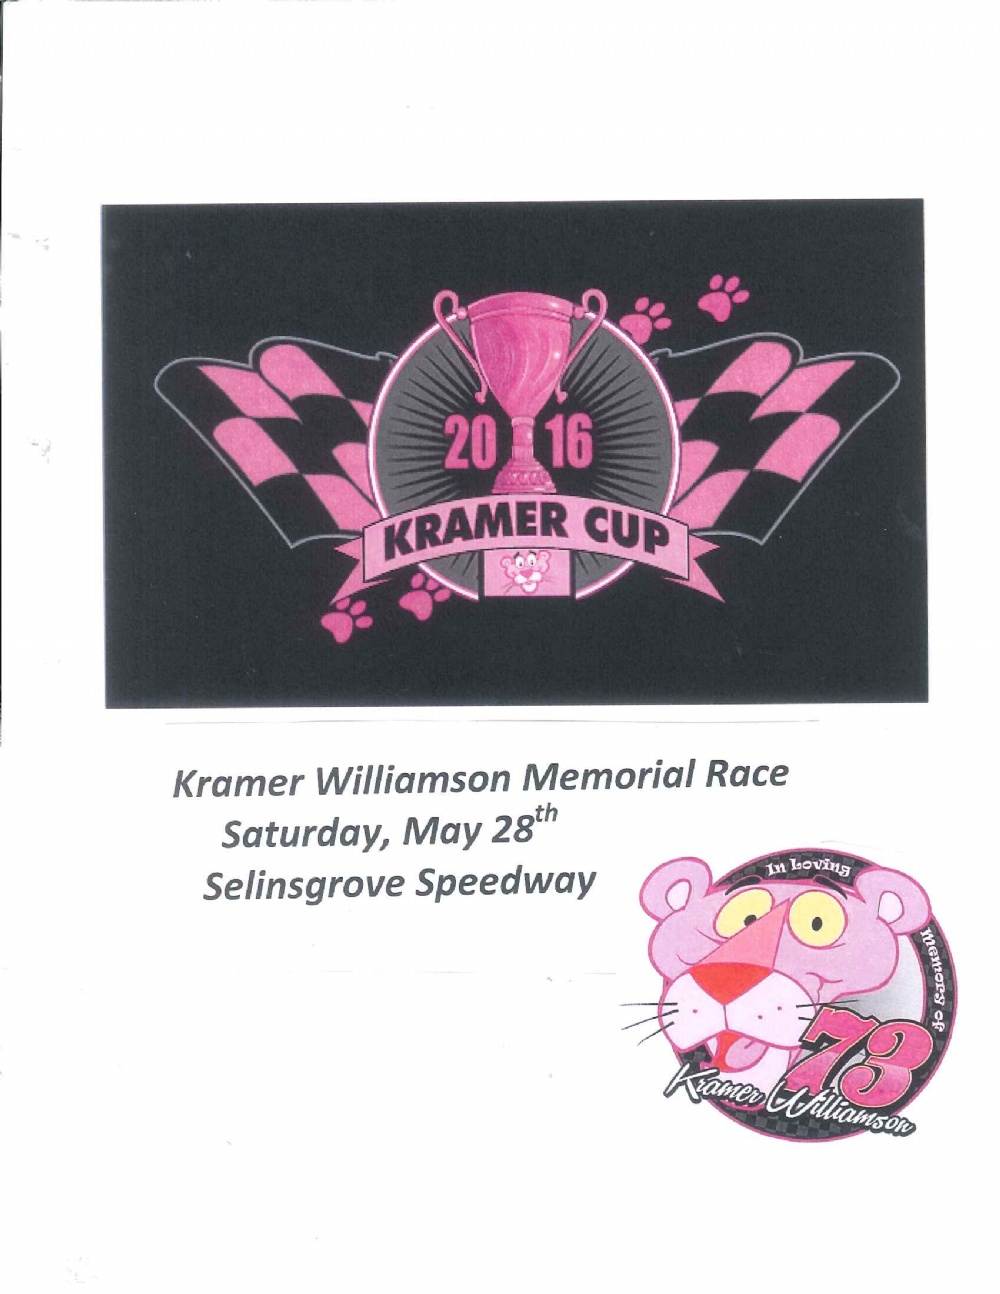 Kramer Cup memorial race at Selinsgrove.   Who will take home the CUP!!!